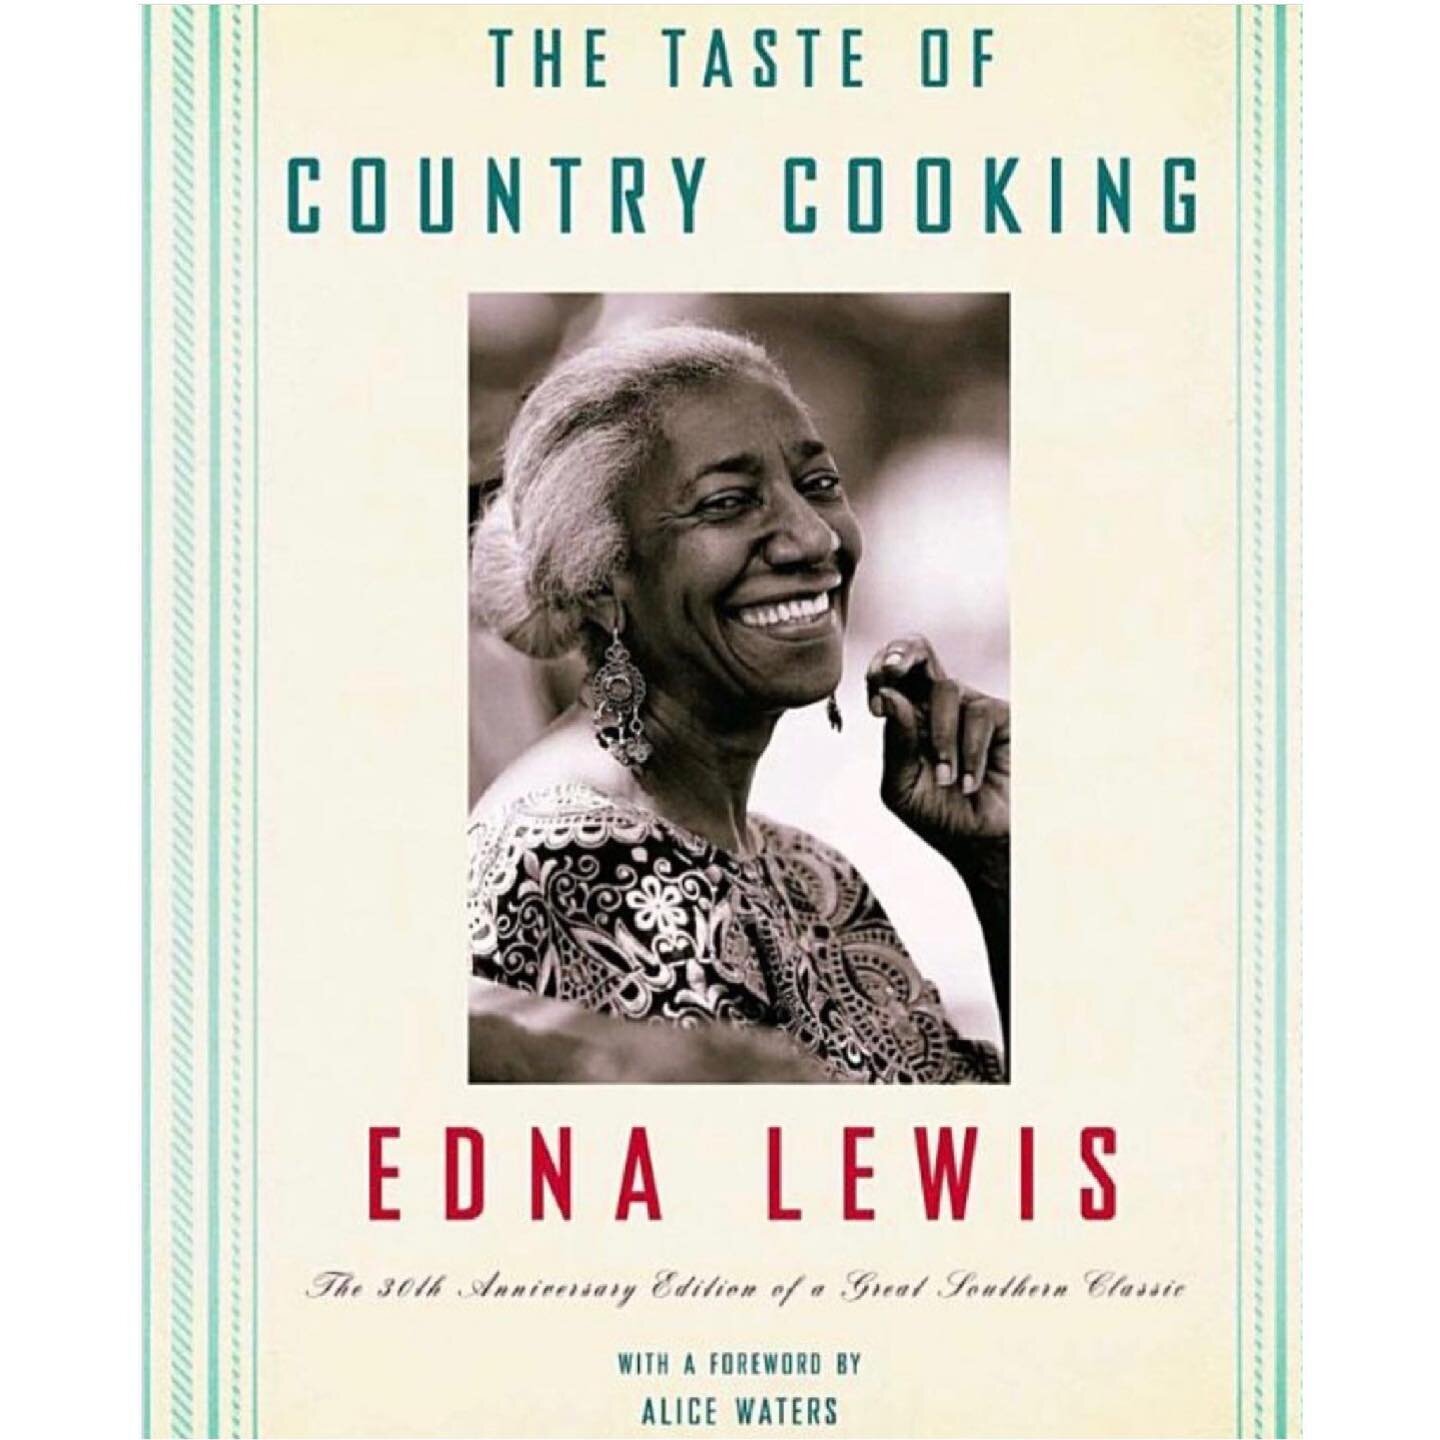 From time to time I revisit Edna Lewis iconic, &ldquo;The Taste of Country Cooking.&rdquo; Not just for recipes which are incredible, but also for her recollections of growing up in her Virginia farming community settled by freed slaves. 

Edna Lewis